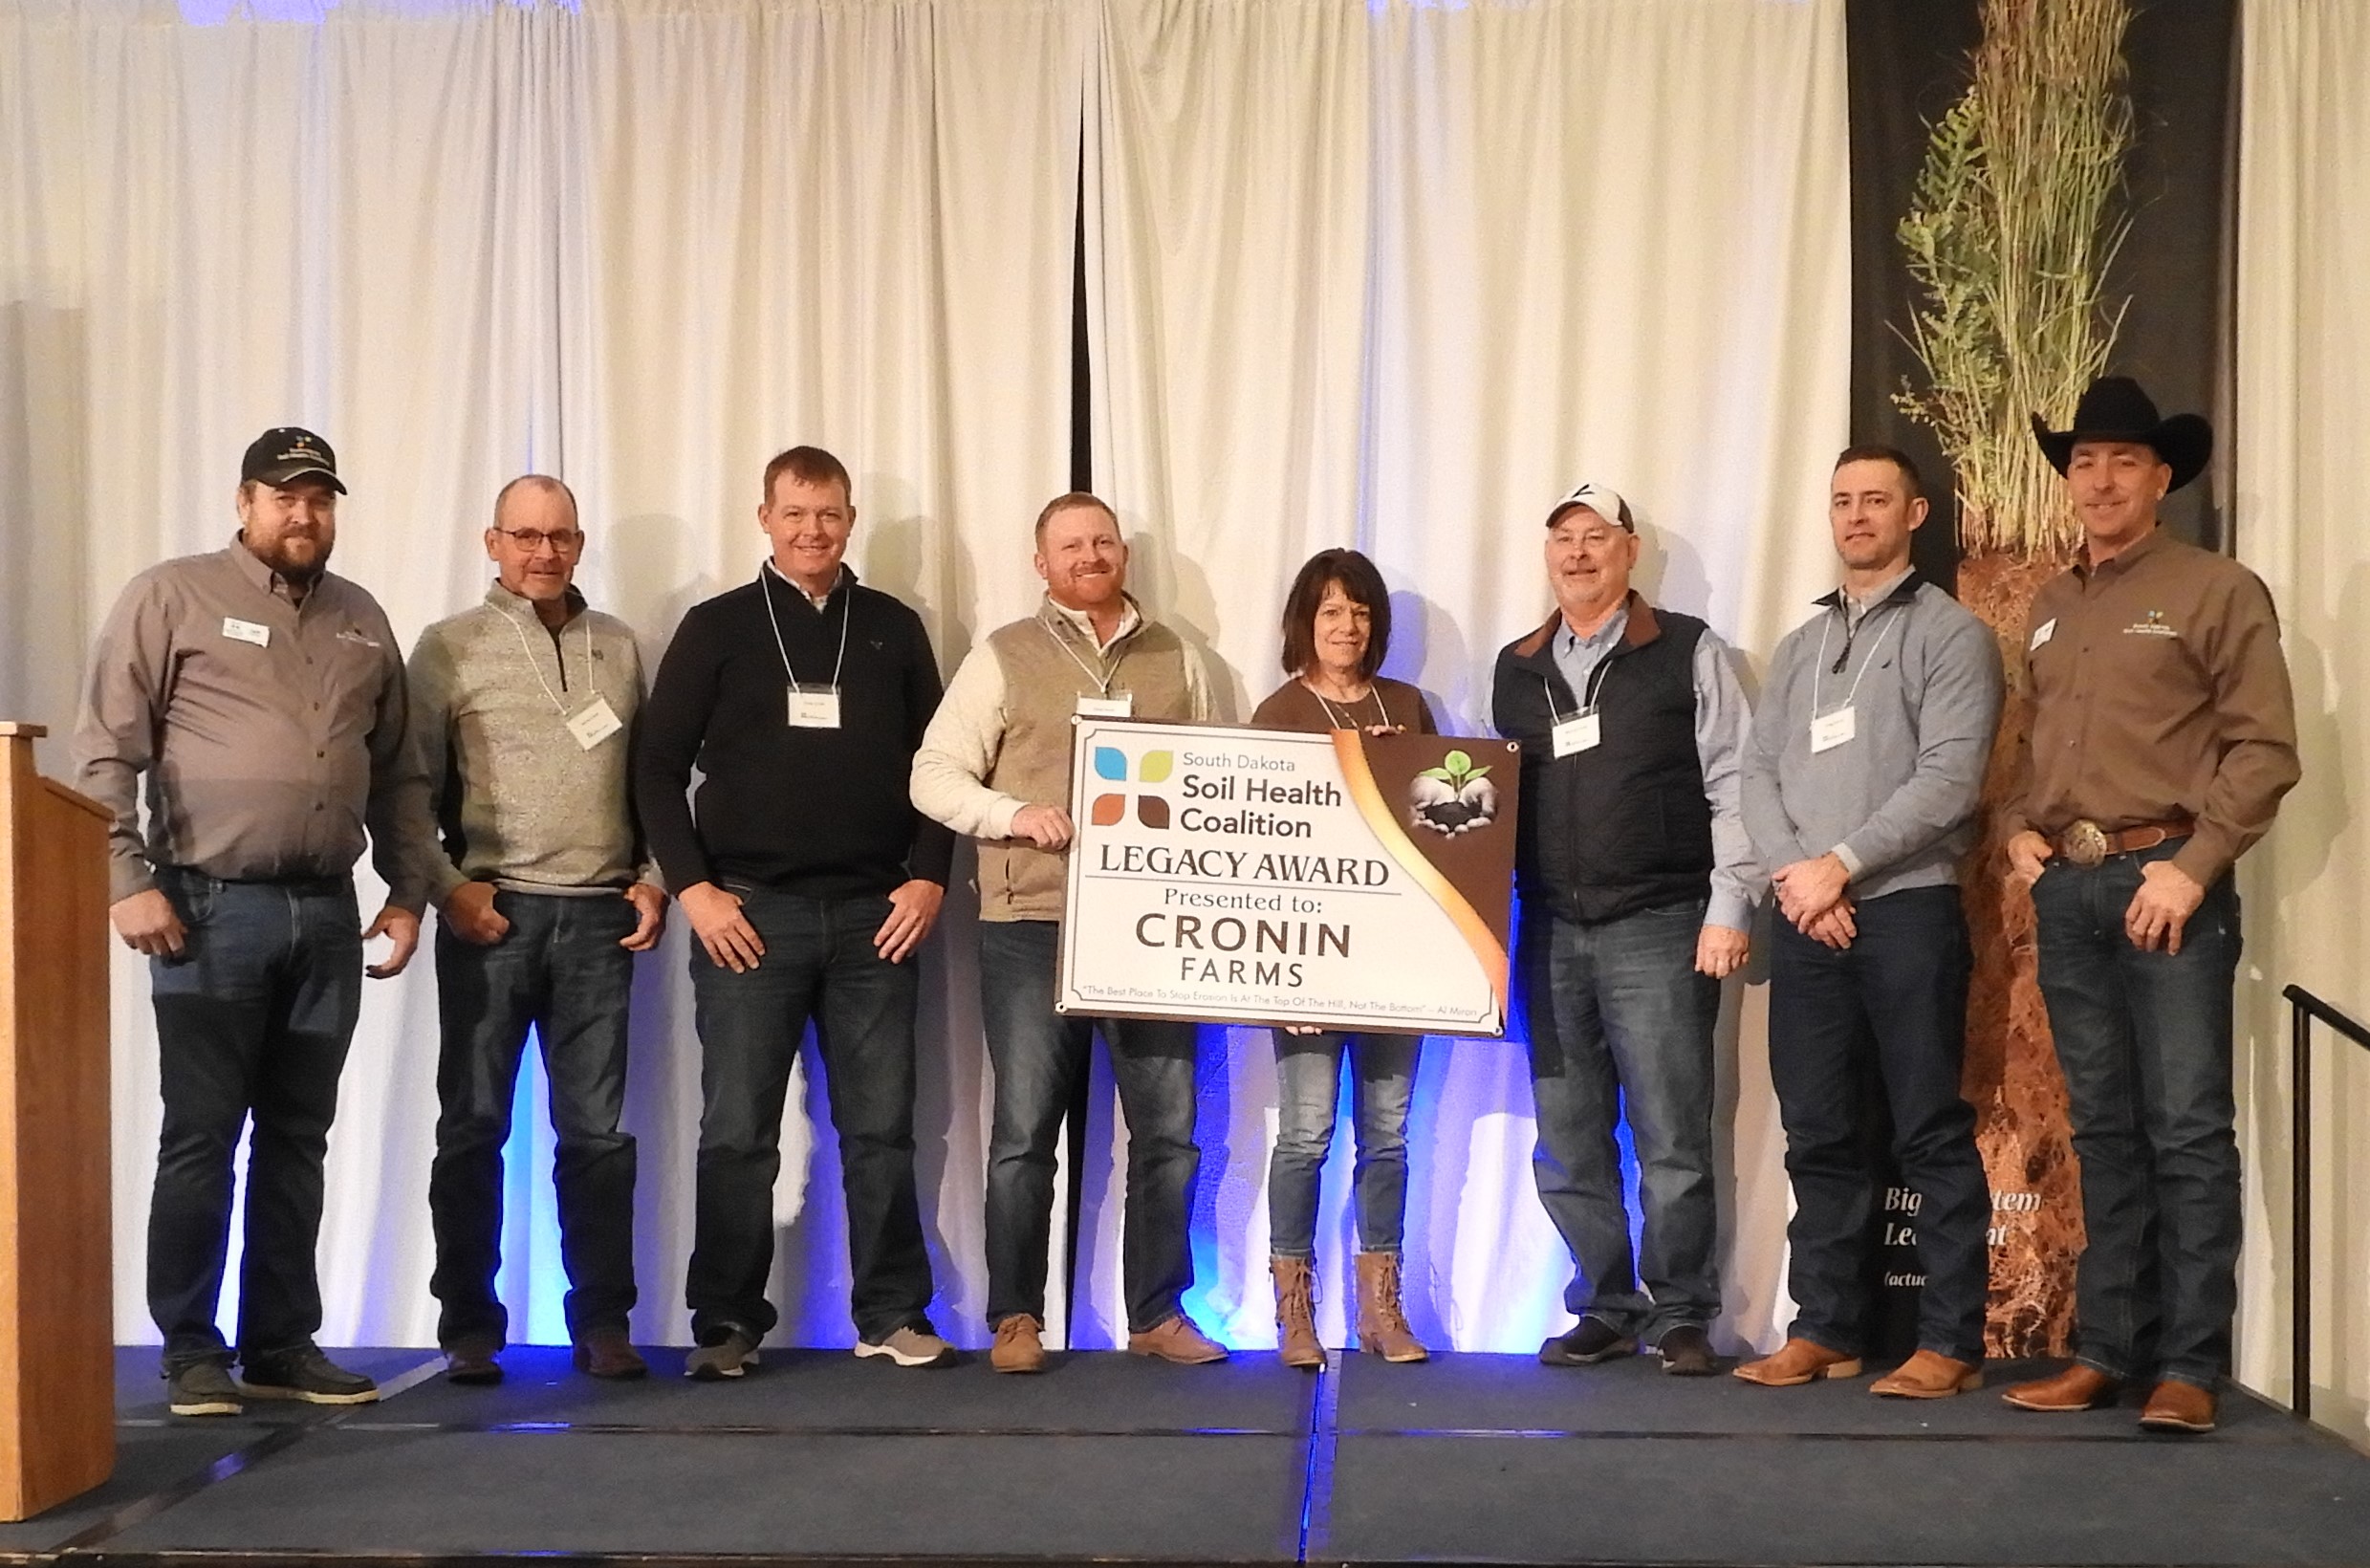 Members of the Cronin Family accept the 2023 Legacy Award at the 2023 Soil Health Conference